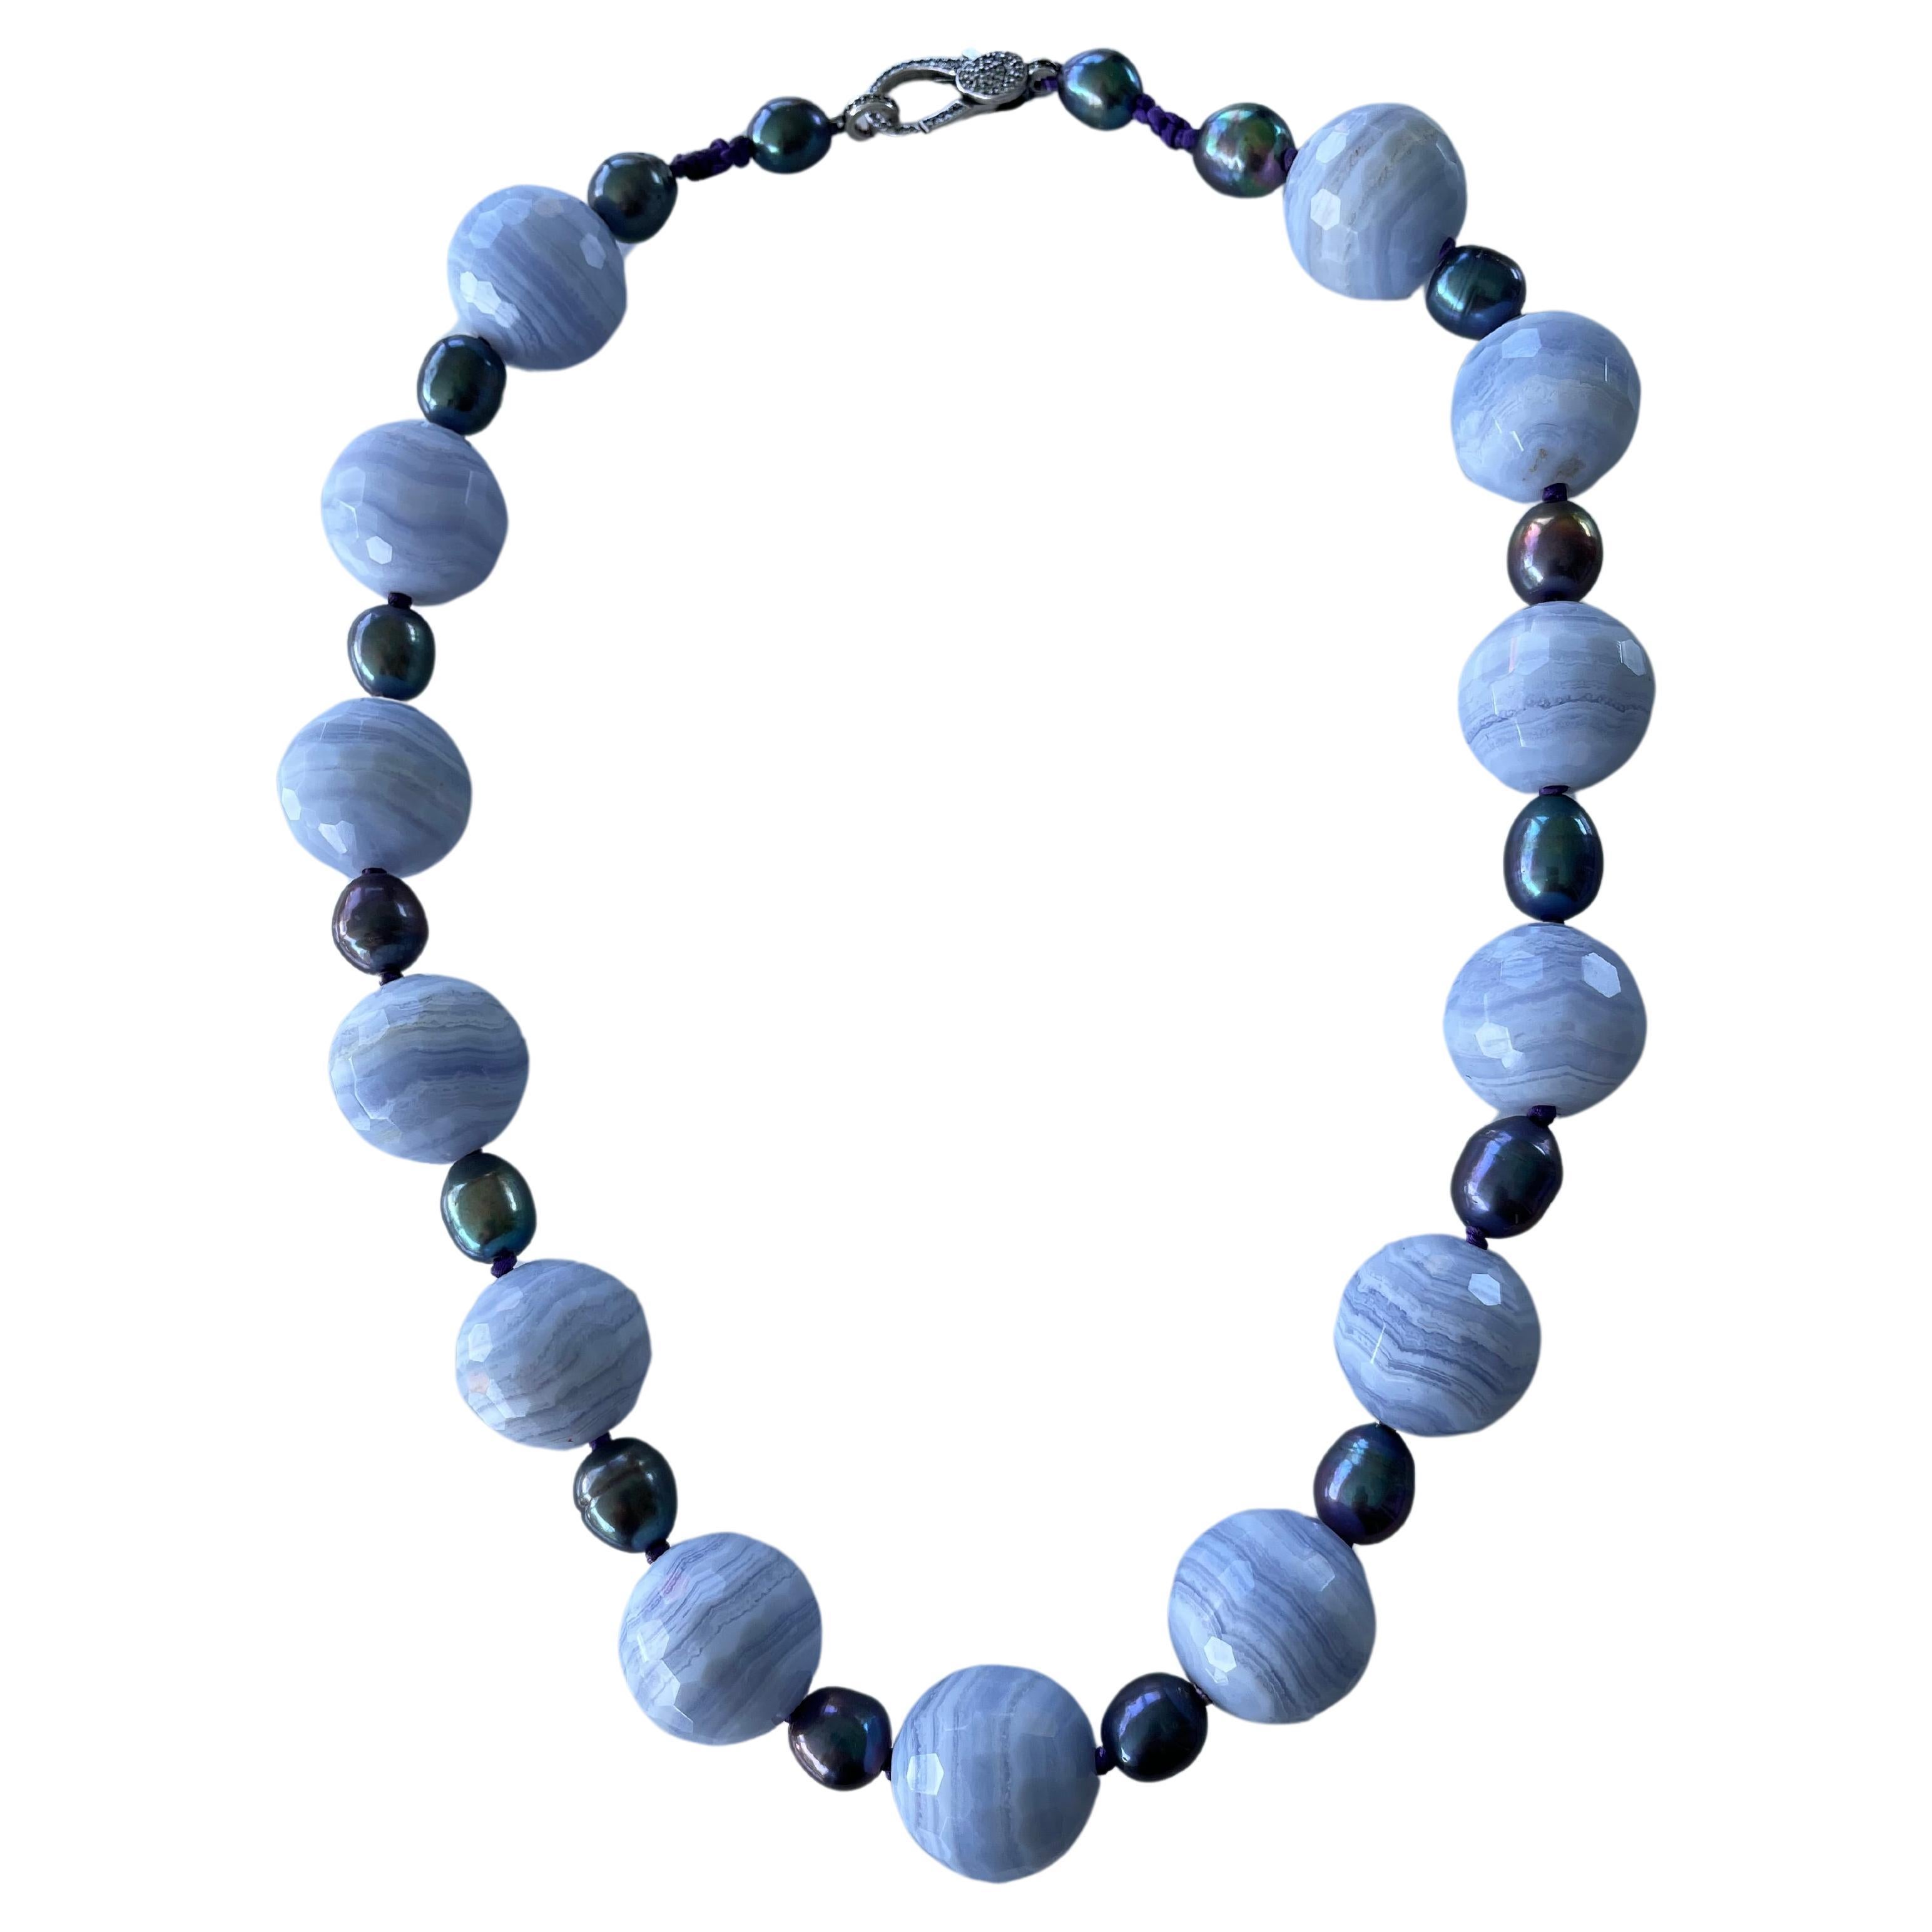 LB Large faceted Blue Lace Agate beads with Peacock freshwater pearls necklace  For Sale